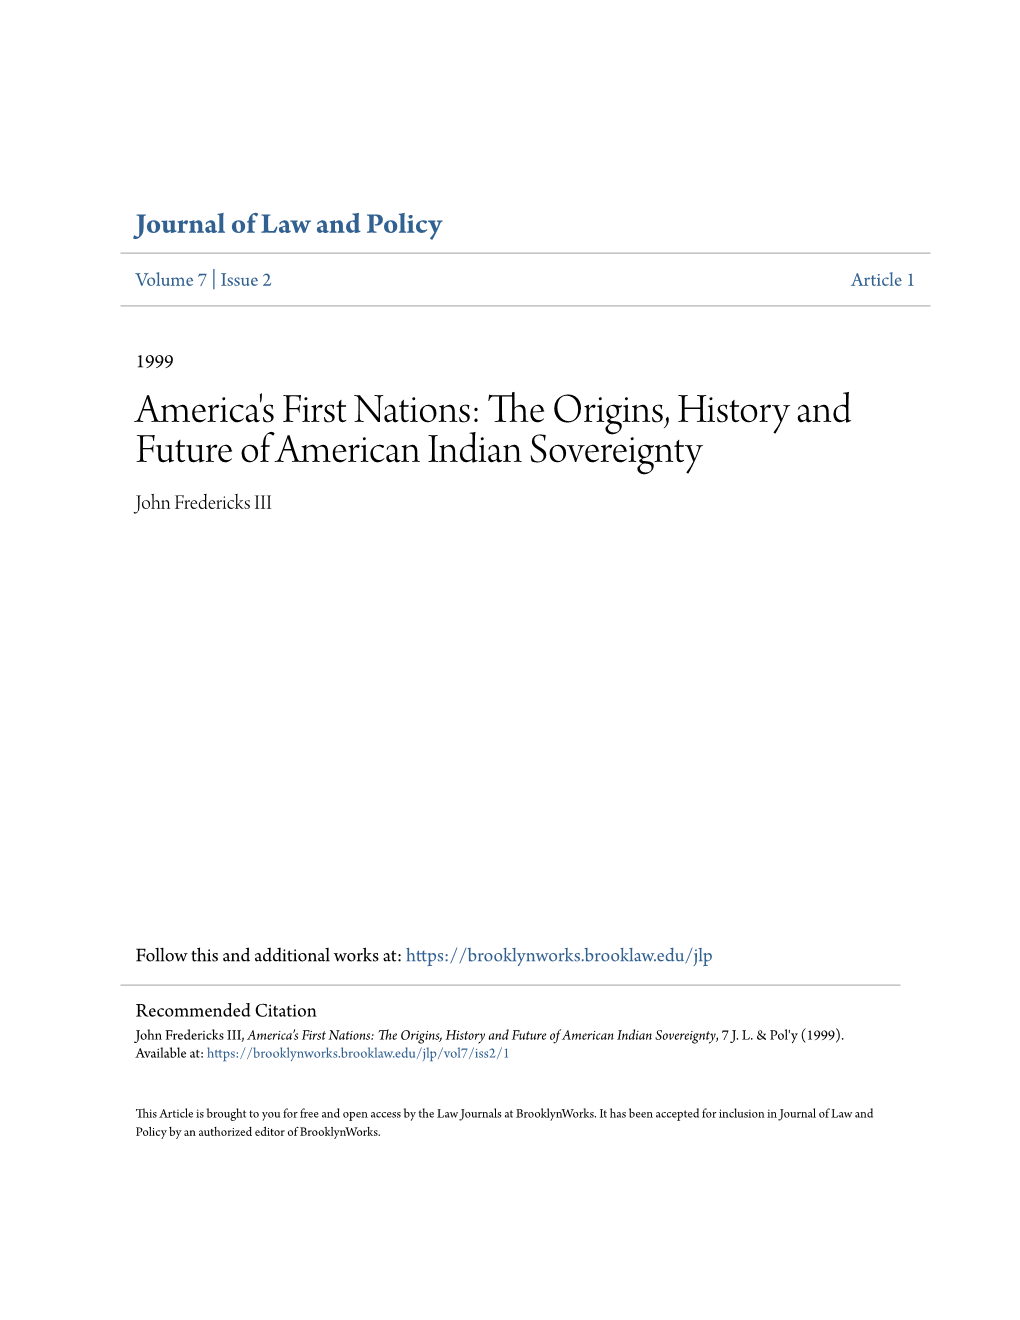 America's First Nations: the Origins, History and Future of American Indian Sovereignty John Fredericks III